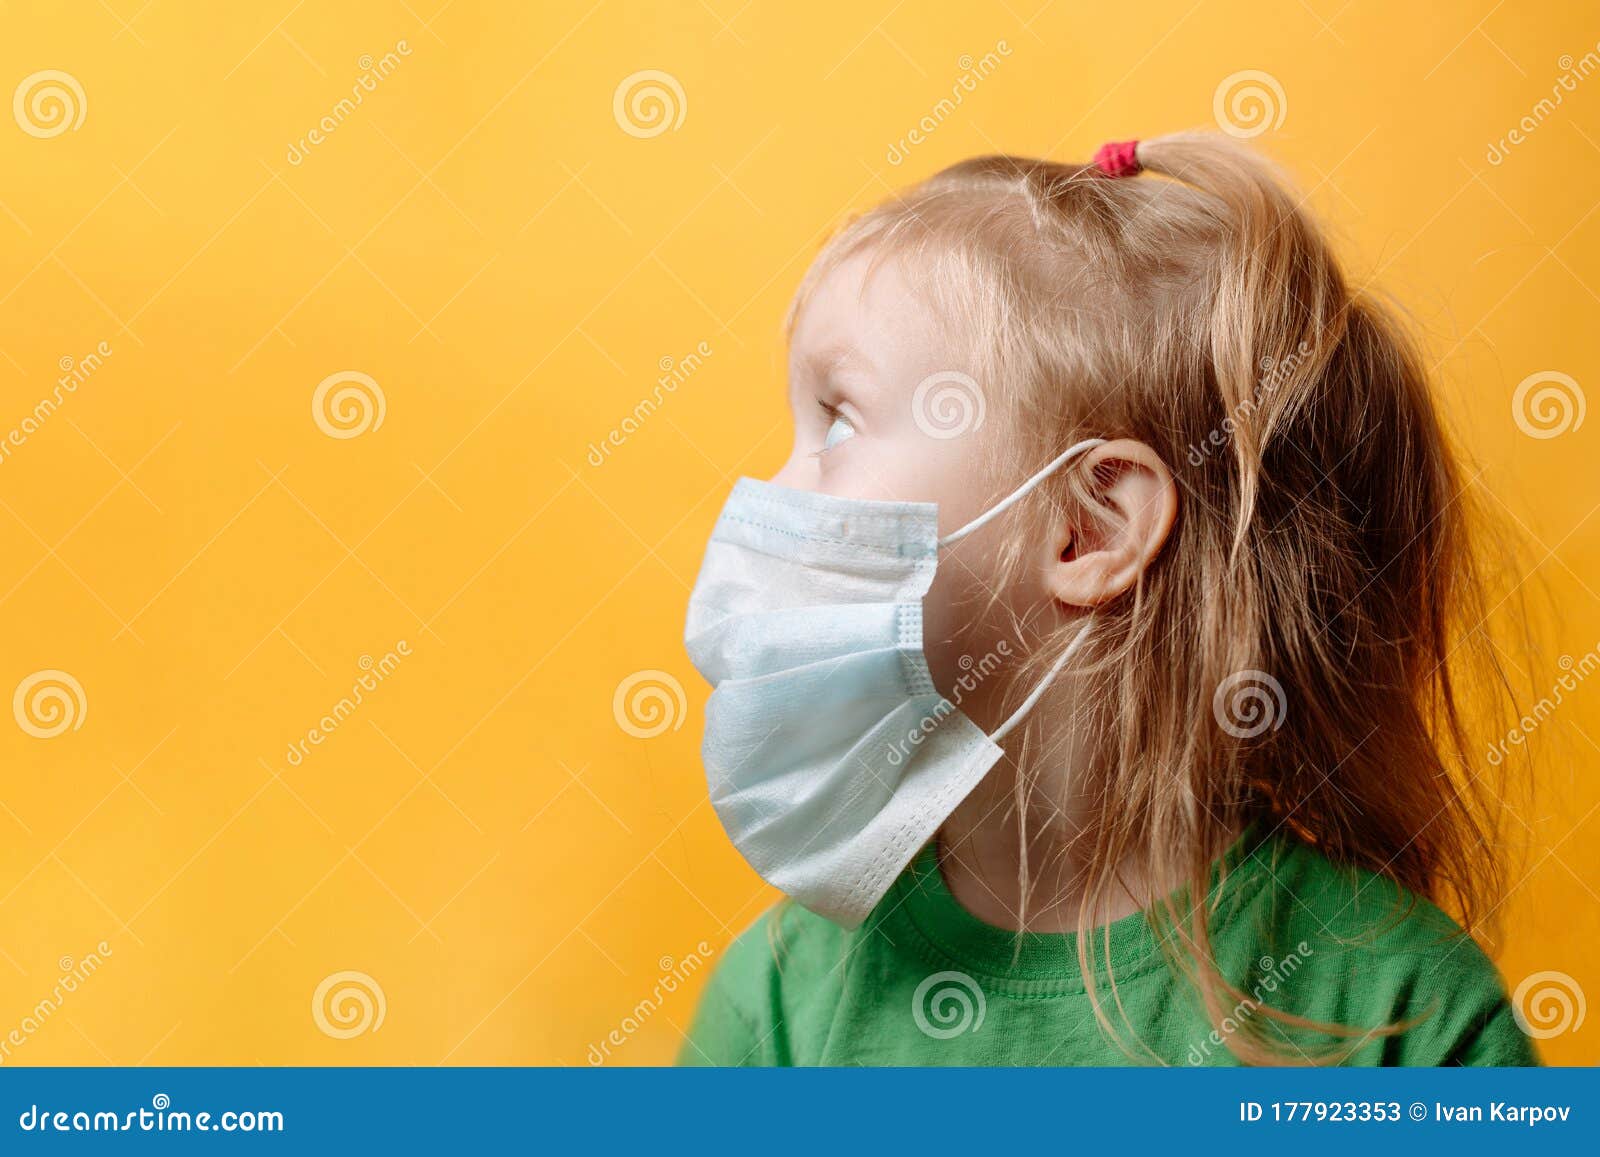 Download A Small Child In A White Medical Mask On A Yellow Background Coronavirus Protecting Children From The Epidemic Space Stock Image Image Of Male Medical 177923353 Yellowimages Mockups